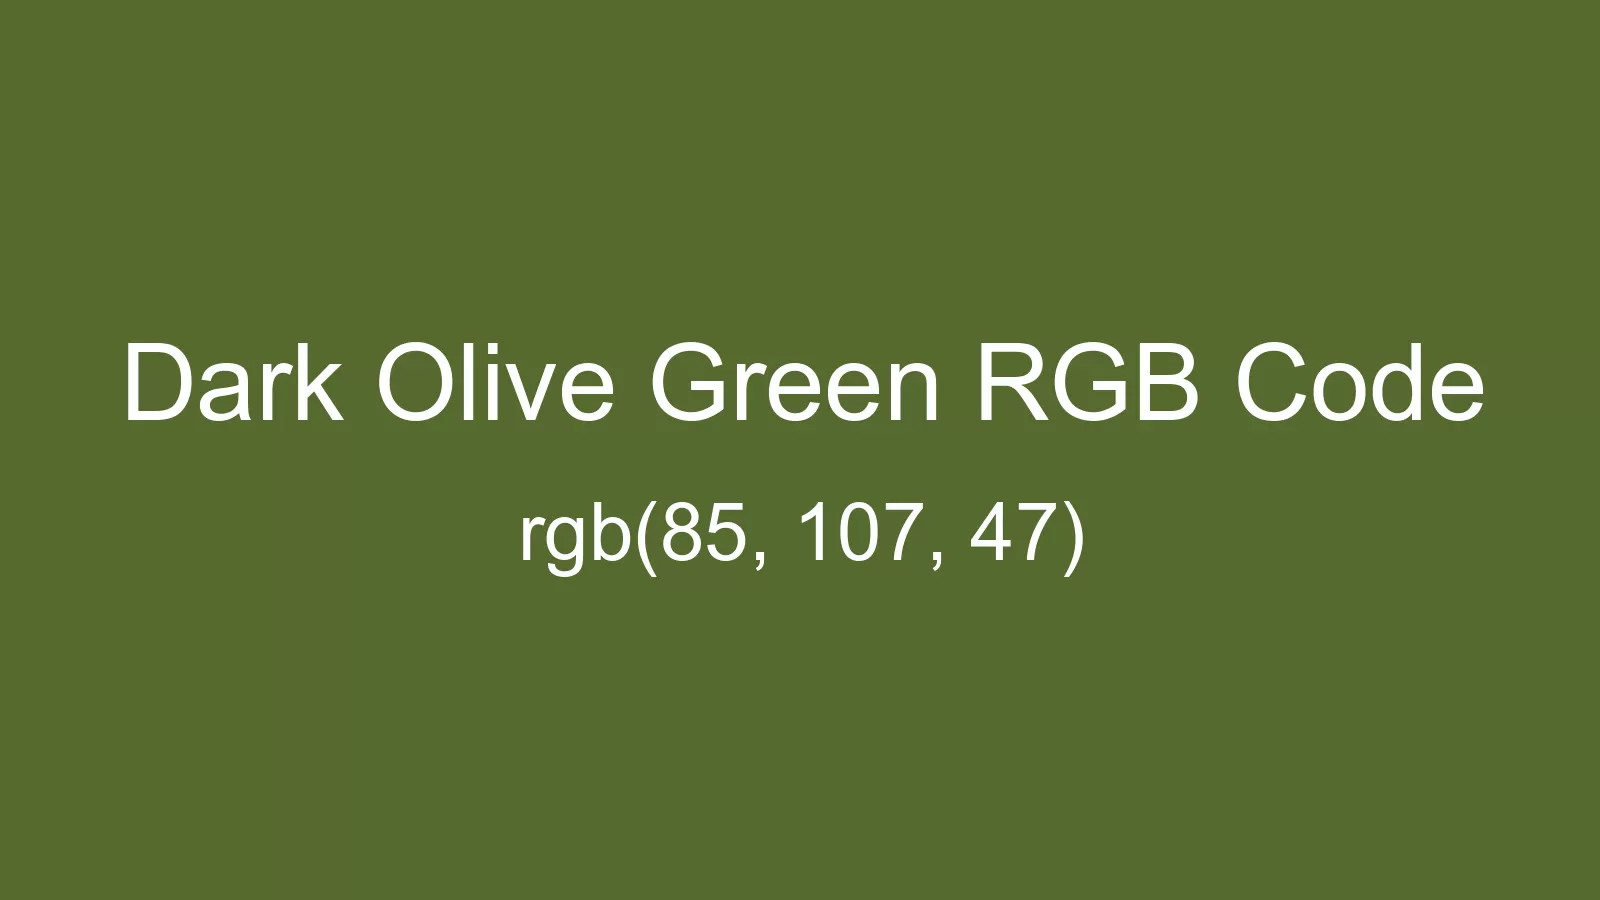 preview image of Dark Olive Green color and RGB code